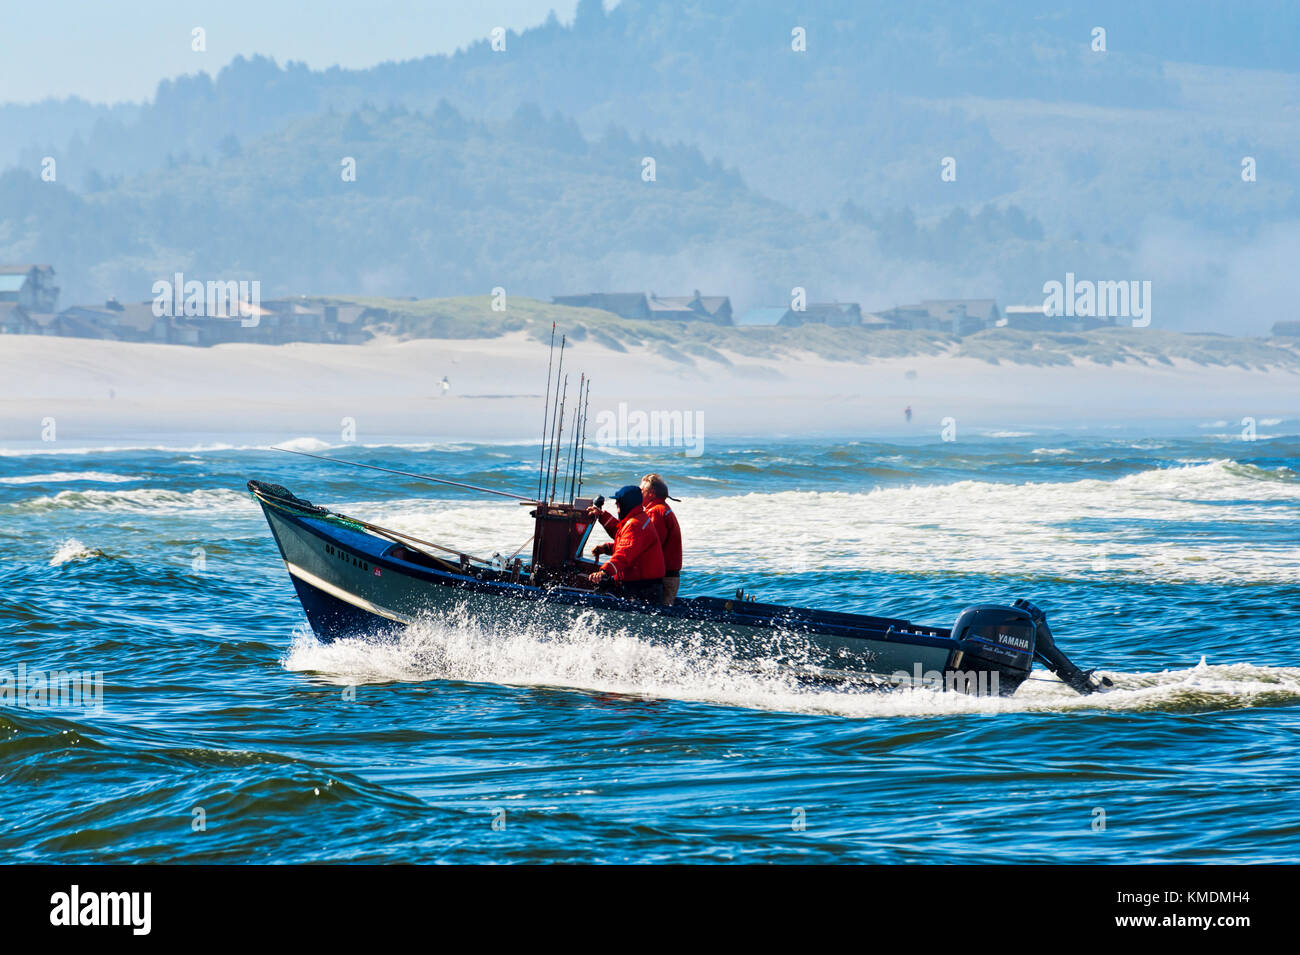 Pacific City, Oregon, USA - July 2, 2015: A dory boat coming in to landing on the beach at Cape Kiwanda, Pacific City, Oregon Stock Photo